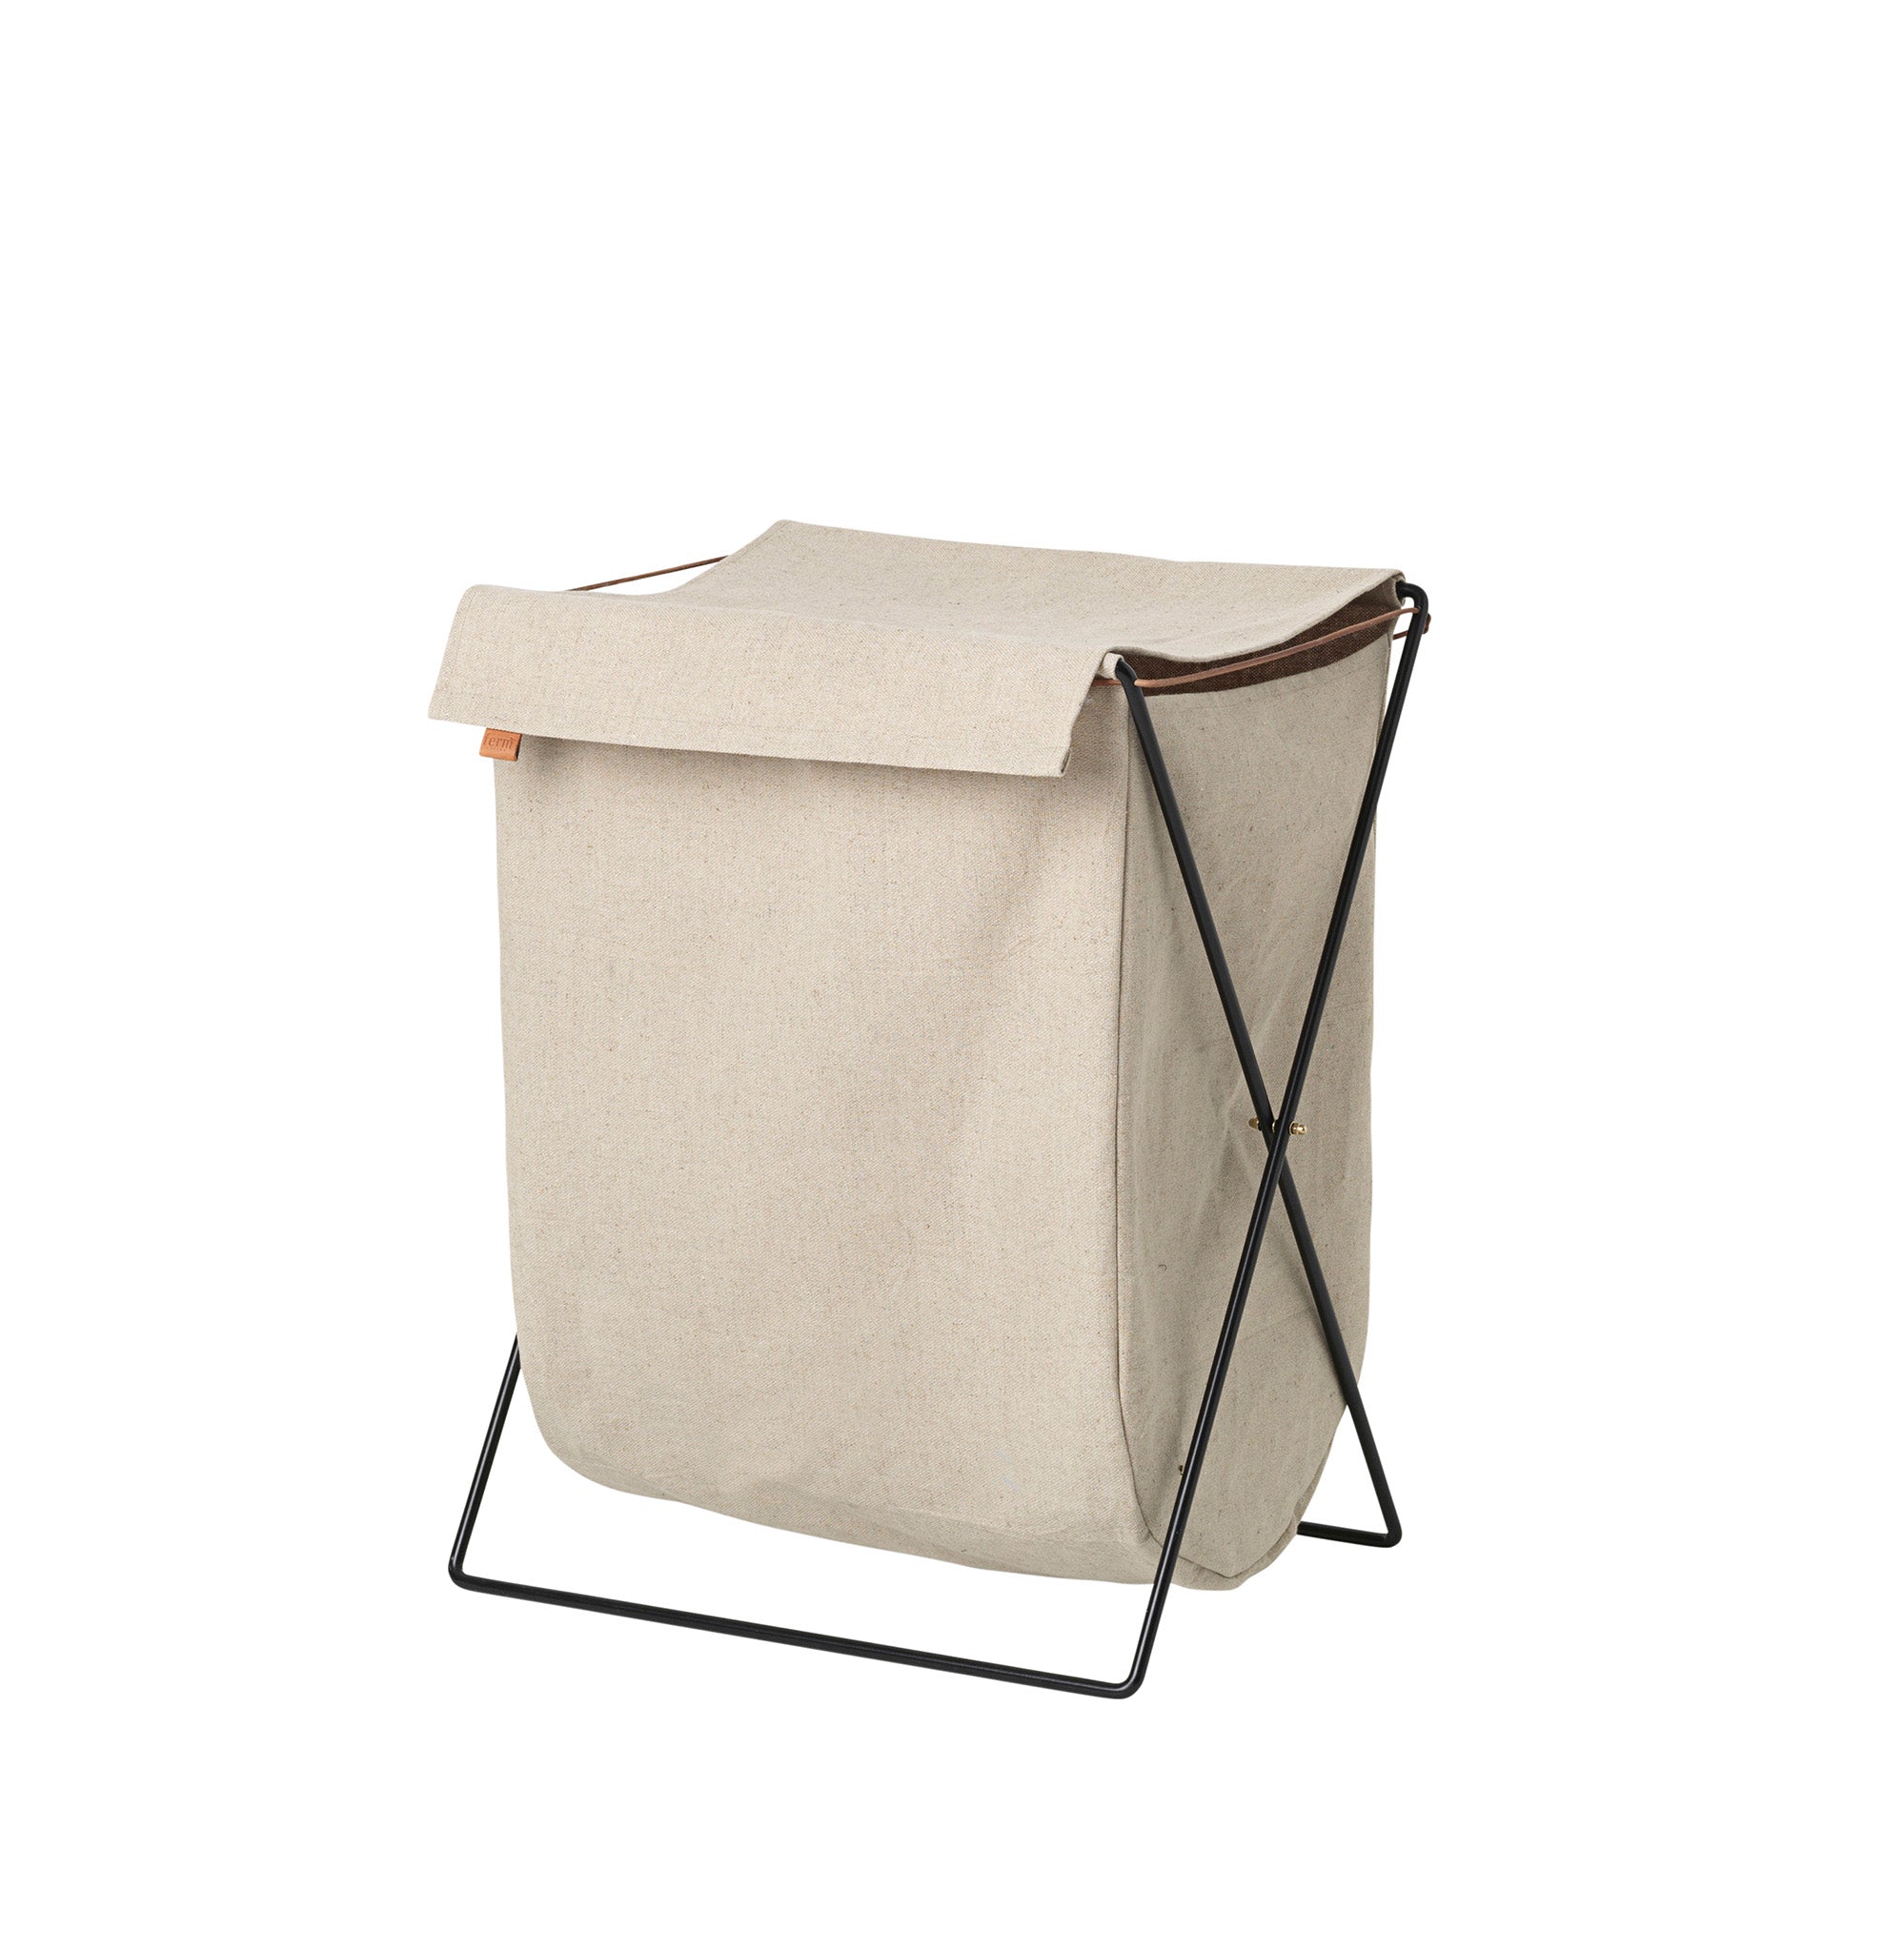 Herman Laundry Stand By Ferm Living